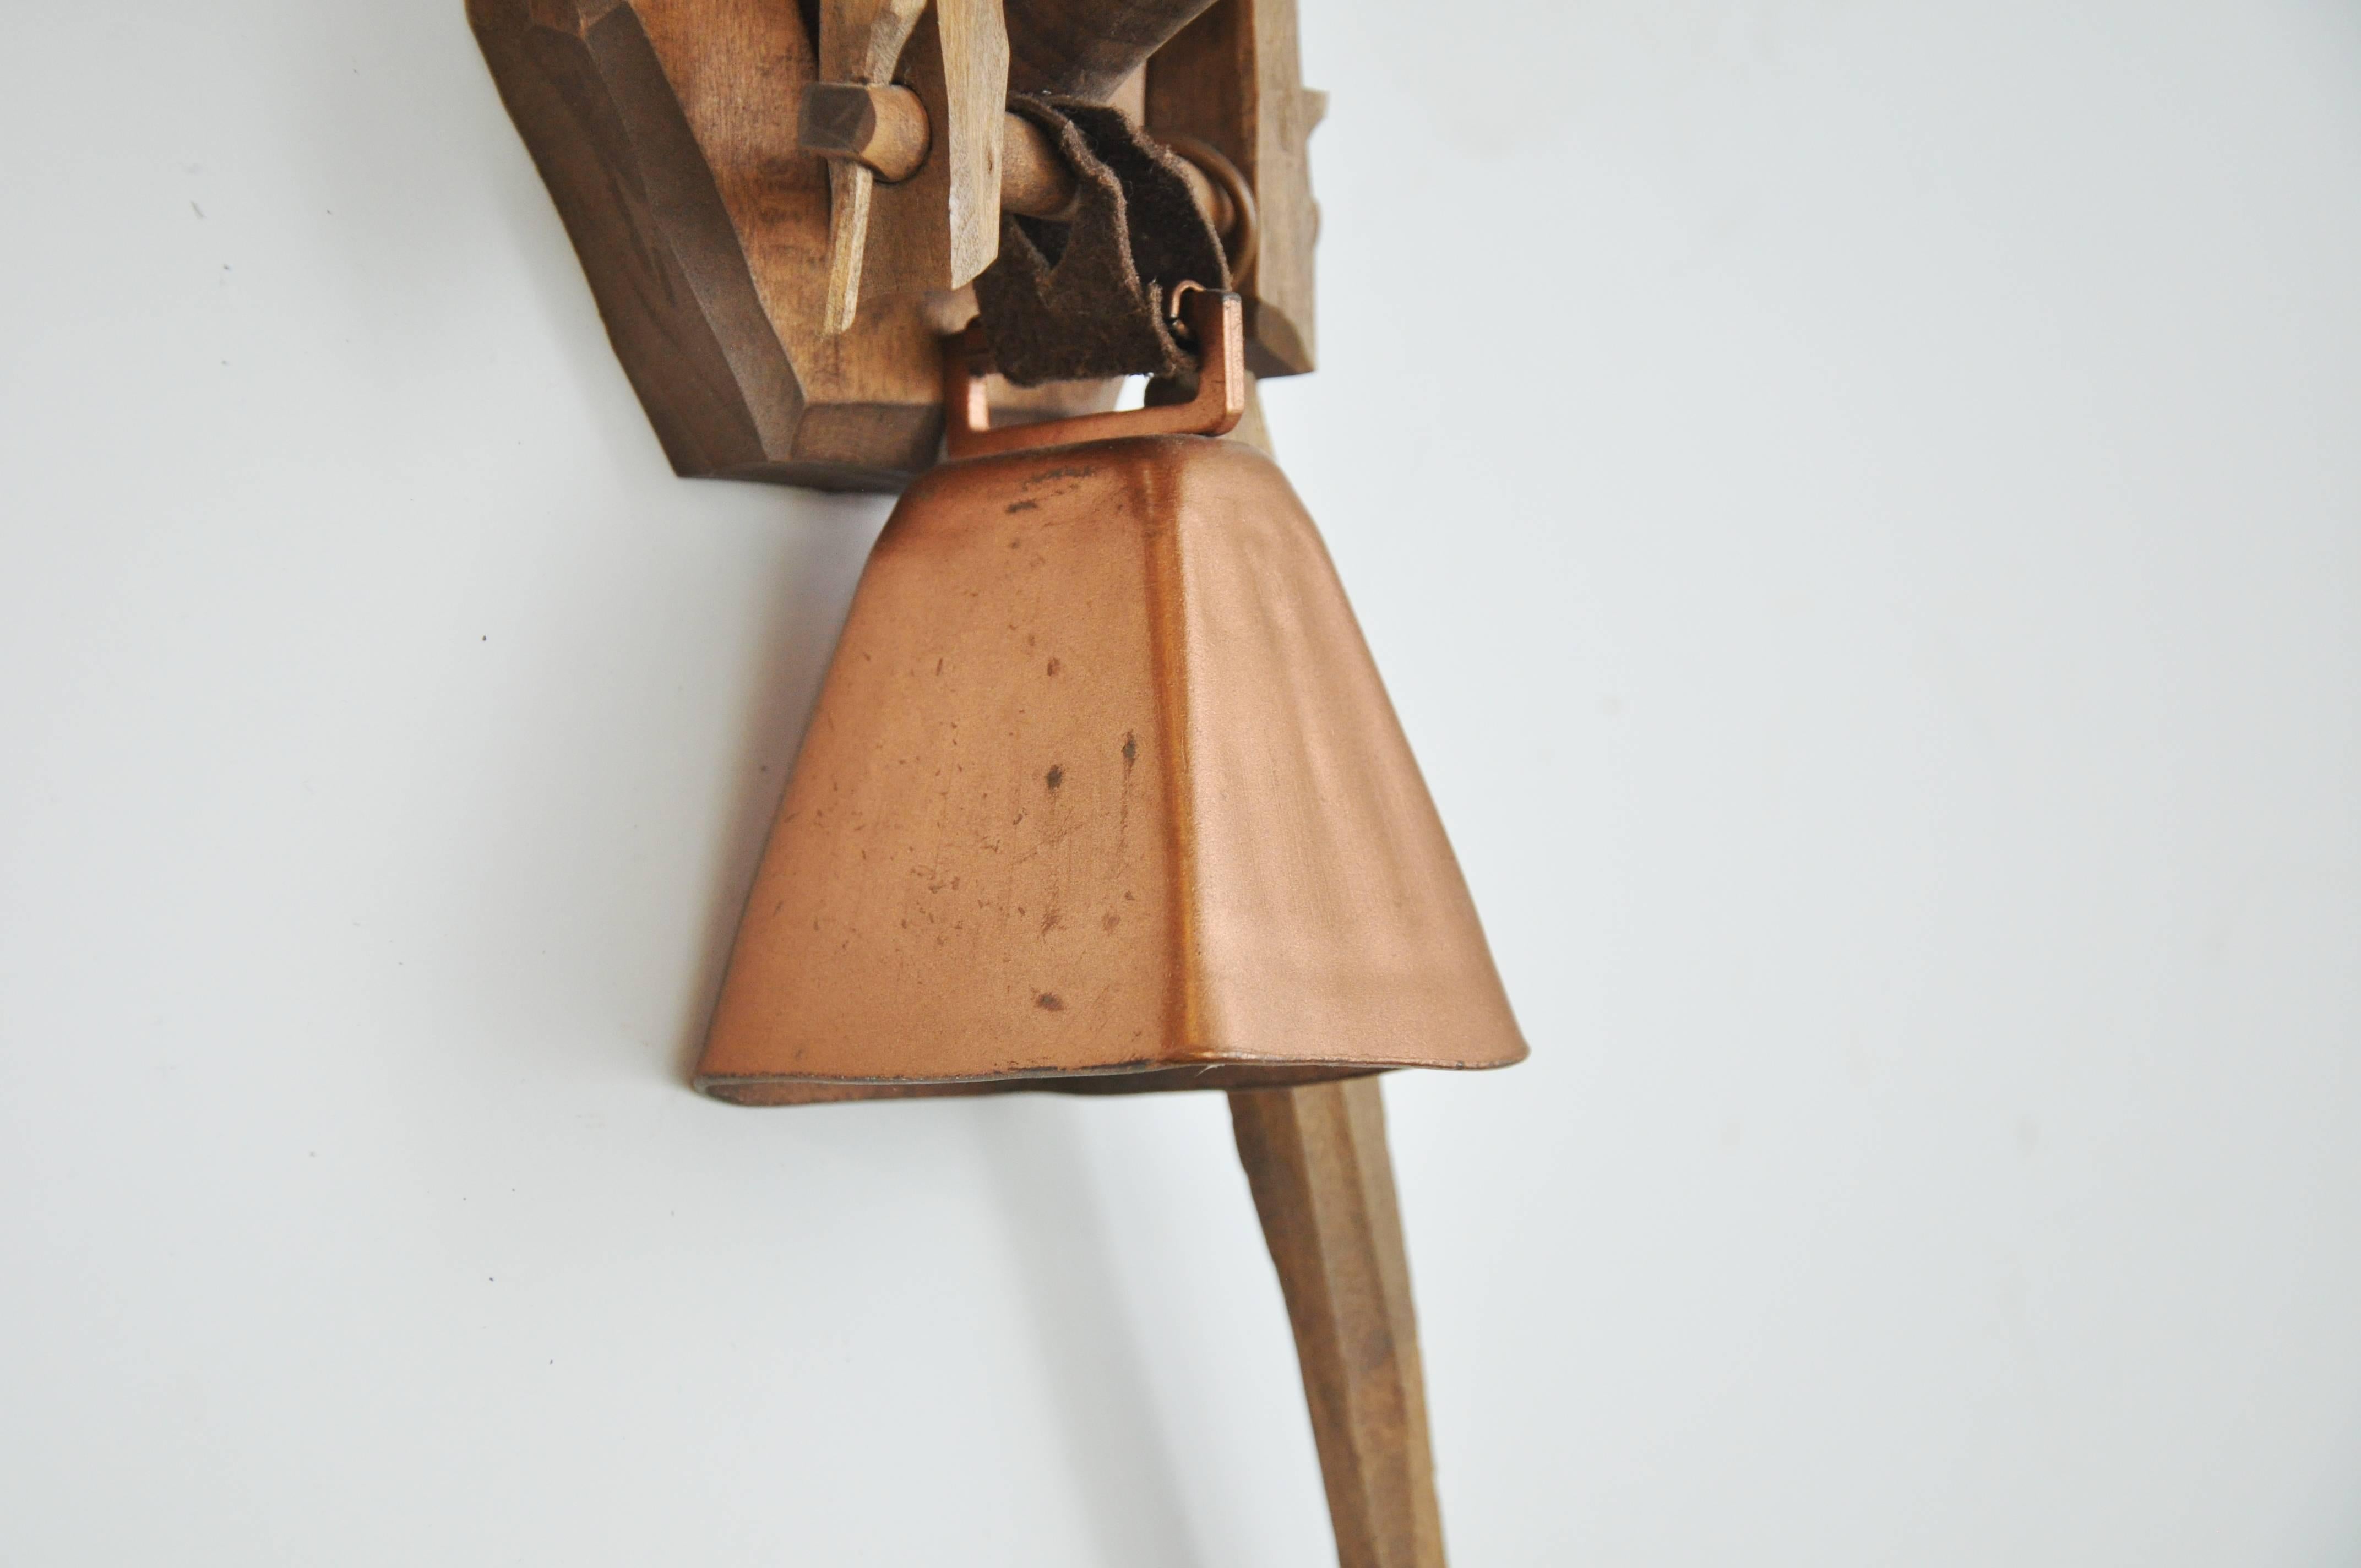 Unusual wall-mounted, hand-carved wooden piece includes attached copper bell and hammer.